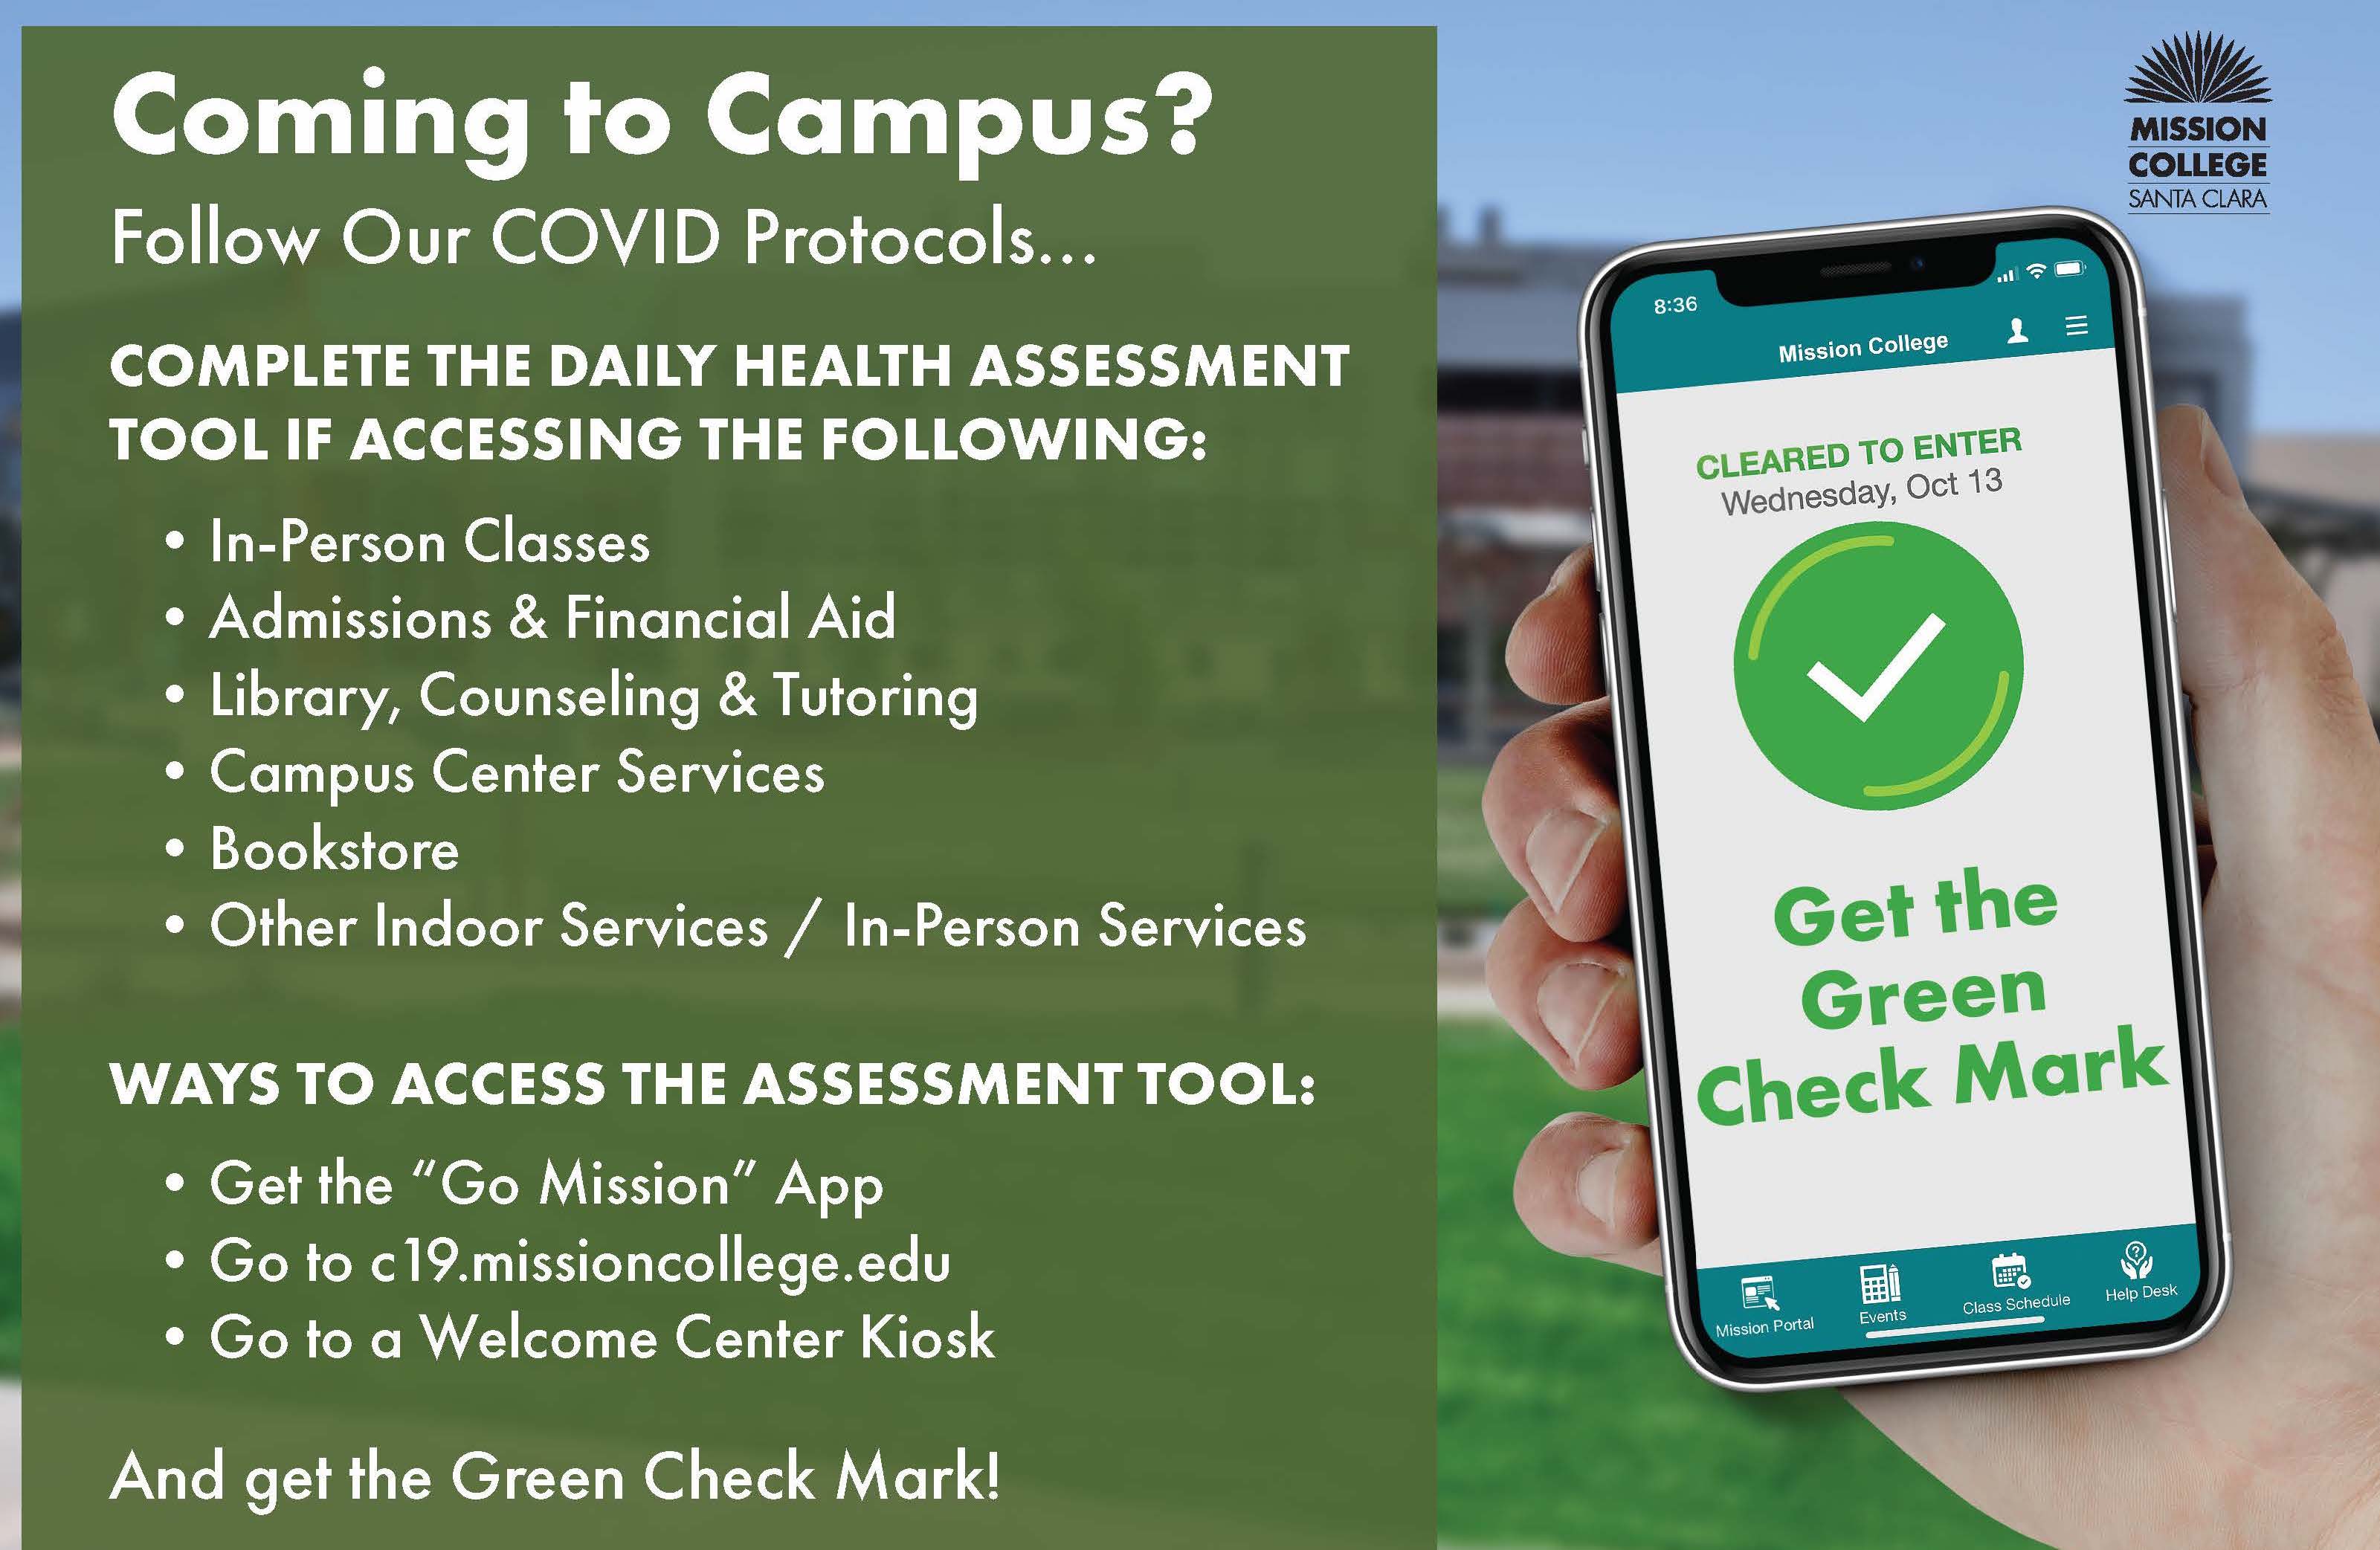 Coming to Campus? Follow our Covid-19 protcols...Complete the daily health assessment tool if accessing the following: in-person classes, Admissions & Financial Aid, Library, Counseling & Tutoring, Campus Center Services, Bookstore, Other Indoor Services/In-Person Services. Ways to access the assessment tool: Get the "Go Mission" App, go to c19.missioncollege.edu, go a Welcome Center Kiosk. Get the green check mark! Effective November 1, all individuals who access on-campus programs and services must be fully vaccinated, be tested twice weekly for COVID-19, or attest to have received a negative COVID-19 test within the last 72 hours.